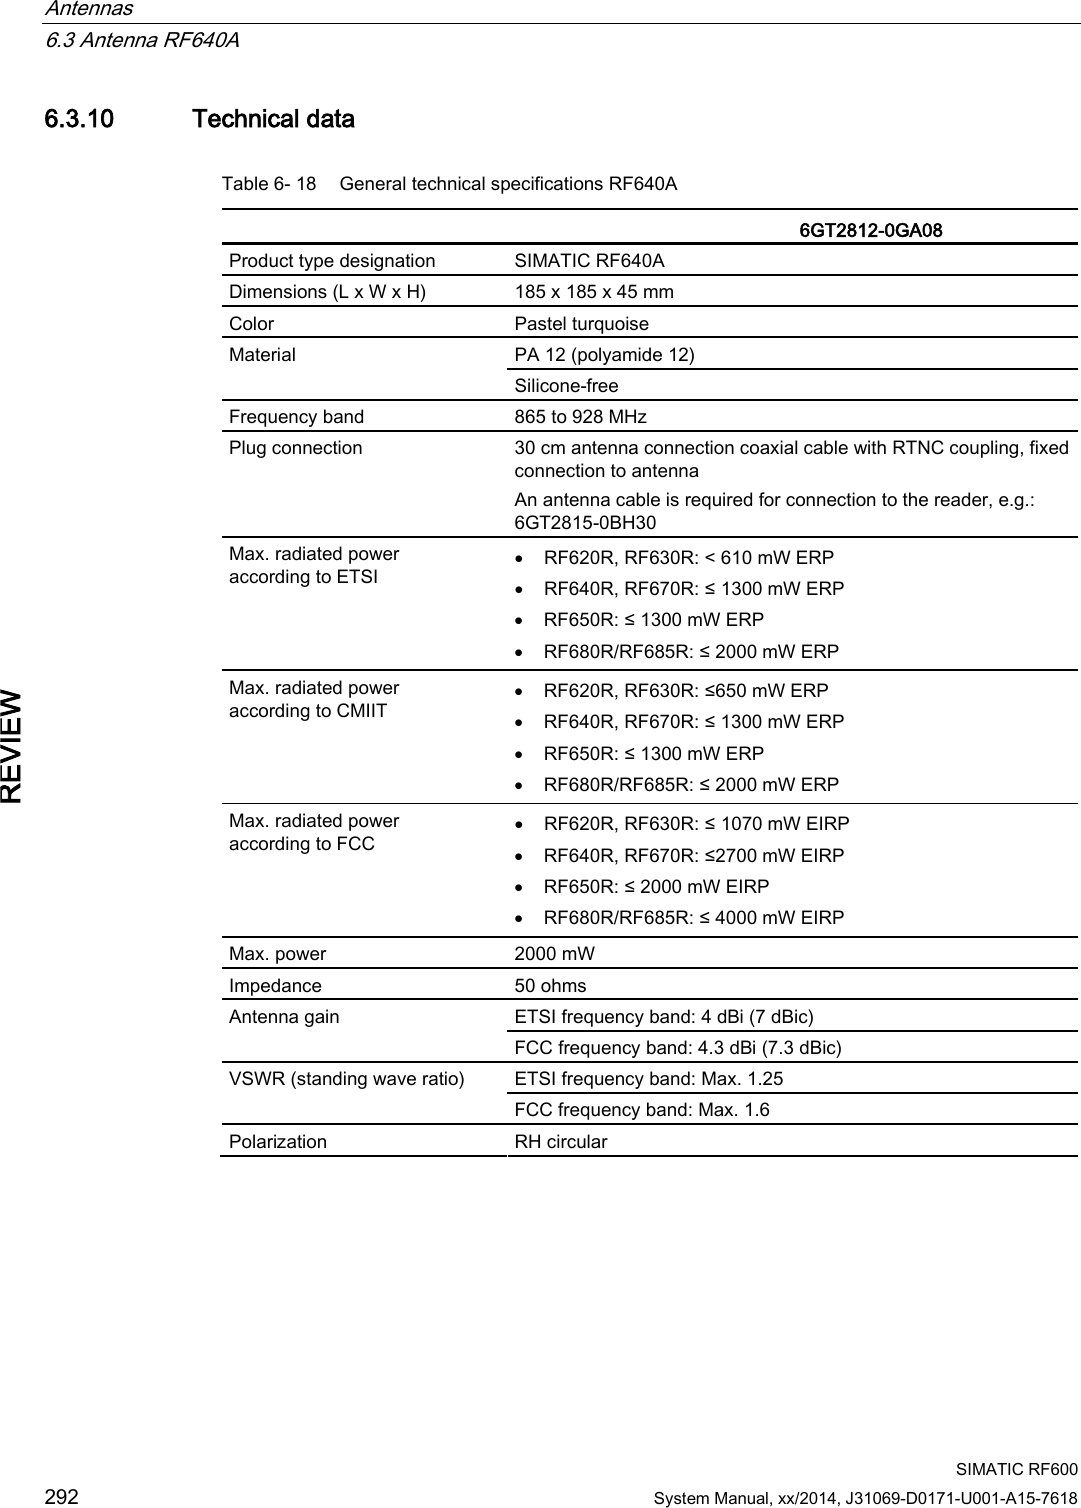 Antennas   6.3 Antenna RF640A  SIMATIC RF600 292 System Manual, xx/2014, J31069-D0171-U001-A15-7618 REVIEW 6.3.10 Technical data Table 6- 18 General technical specifications RF640A   6GT2812-0GA08 Product type designation SIMATIC RF640A Dimensions (L x W x H) 185 x 185 x 45 mm Color Pastel turquoise Material PA 12 (polyamide 12) Silicone-free Frequency band 865 to 928 MHz Plug connection 30 cm antenna connection coaxial cable with RTNC coupling, fixed connection to antenna An antenna cable is required for connection to the reader, e.g.: 6GT2815-0BH30 Max. radiated power according to ETSI • RF620R, RF630R: &lt; 610 mW ERP • RF640R, RF670R: ≤ 1300 mW ERP • RF650R: ≤ 1300 mW ERP • RF680R/RF685R: ≤ 2000 mW ERP Max. radiated power according to CMIIT • RF620R, RF630R: ≤650 mW ERP • RF640R, RF670R: ≤ 1300 mW ERP • RF650R: ≤ 1300 mW ERP • RF680R/RF685R: ≤ 2000 mW ERP Max. radiated power according to FCC • RF620R, RF630R: ≤ 1070 mW EIRP • RF640R, RF670R: ≤2700 mW EIRP • RF650R: ≤ 2000 mW EIRP • RF680R/RF685R: ≤ 4000 mW EIRP Max. power 2000 mW  Impedance 50 ohms Antenna gain ETSI frequency band: 4 dBi (7 dBic) FCC frequency band: 4.3 dBi (7.3 dBic) VSWR (standing wave ratio) ETSI frequency band: Max. 1.25 FCC frequency band: Max. 1.6 Polarization RH circular 